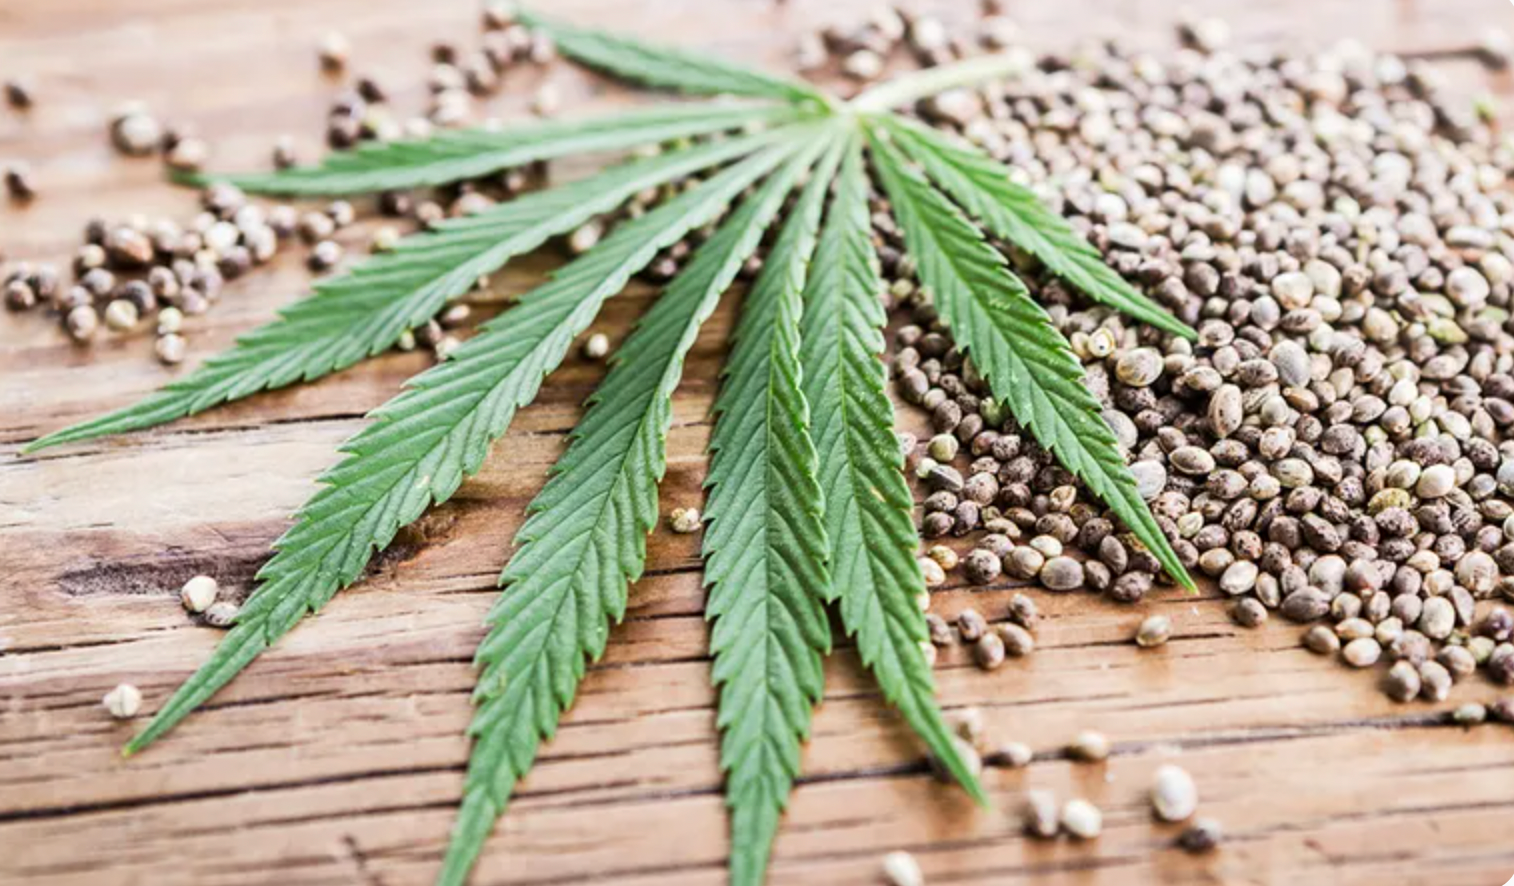 All Cannabis Seeds are now Legal to Sell Under Hemp